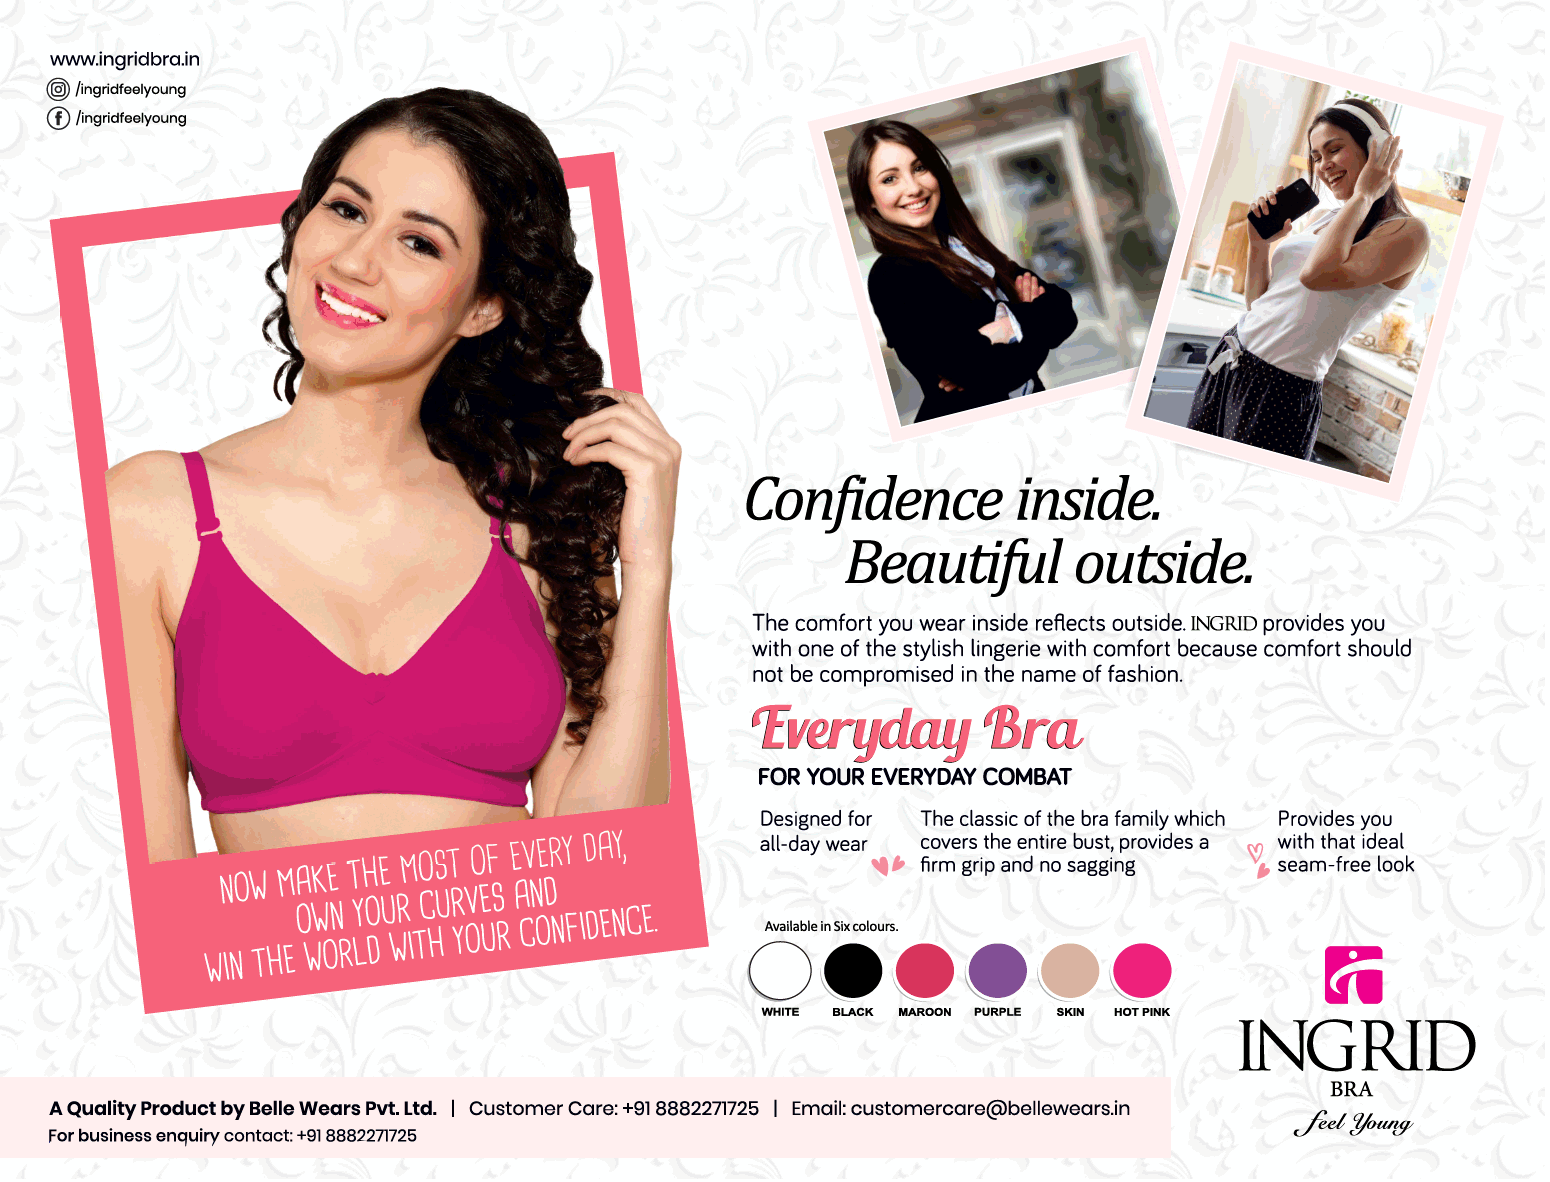 Ingrid Bra Feel Young Confidence Inside Beautiful Outside Ad